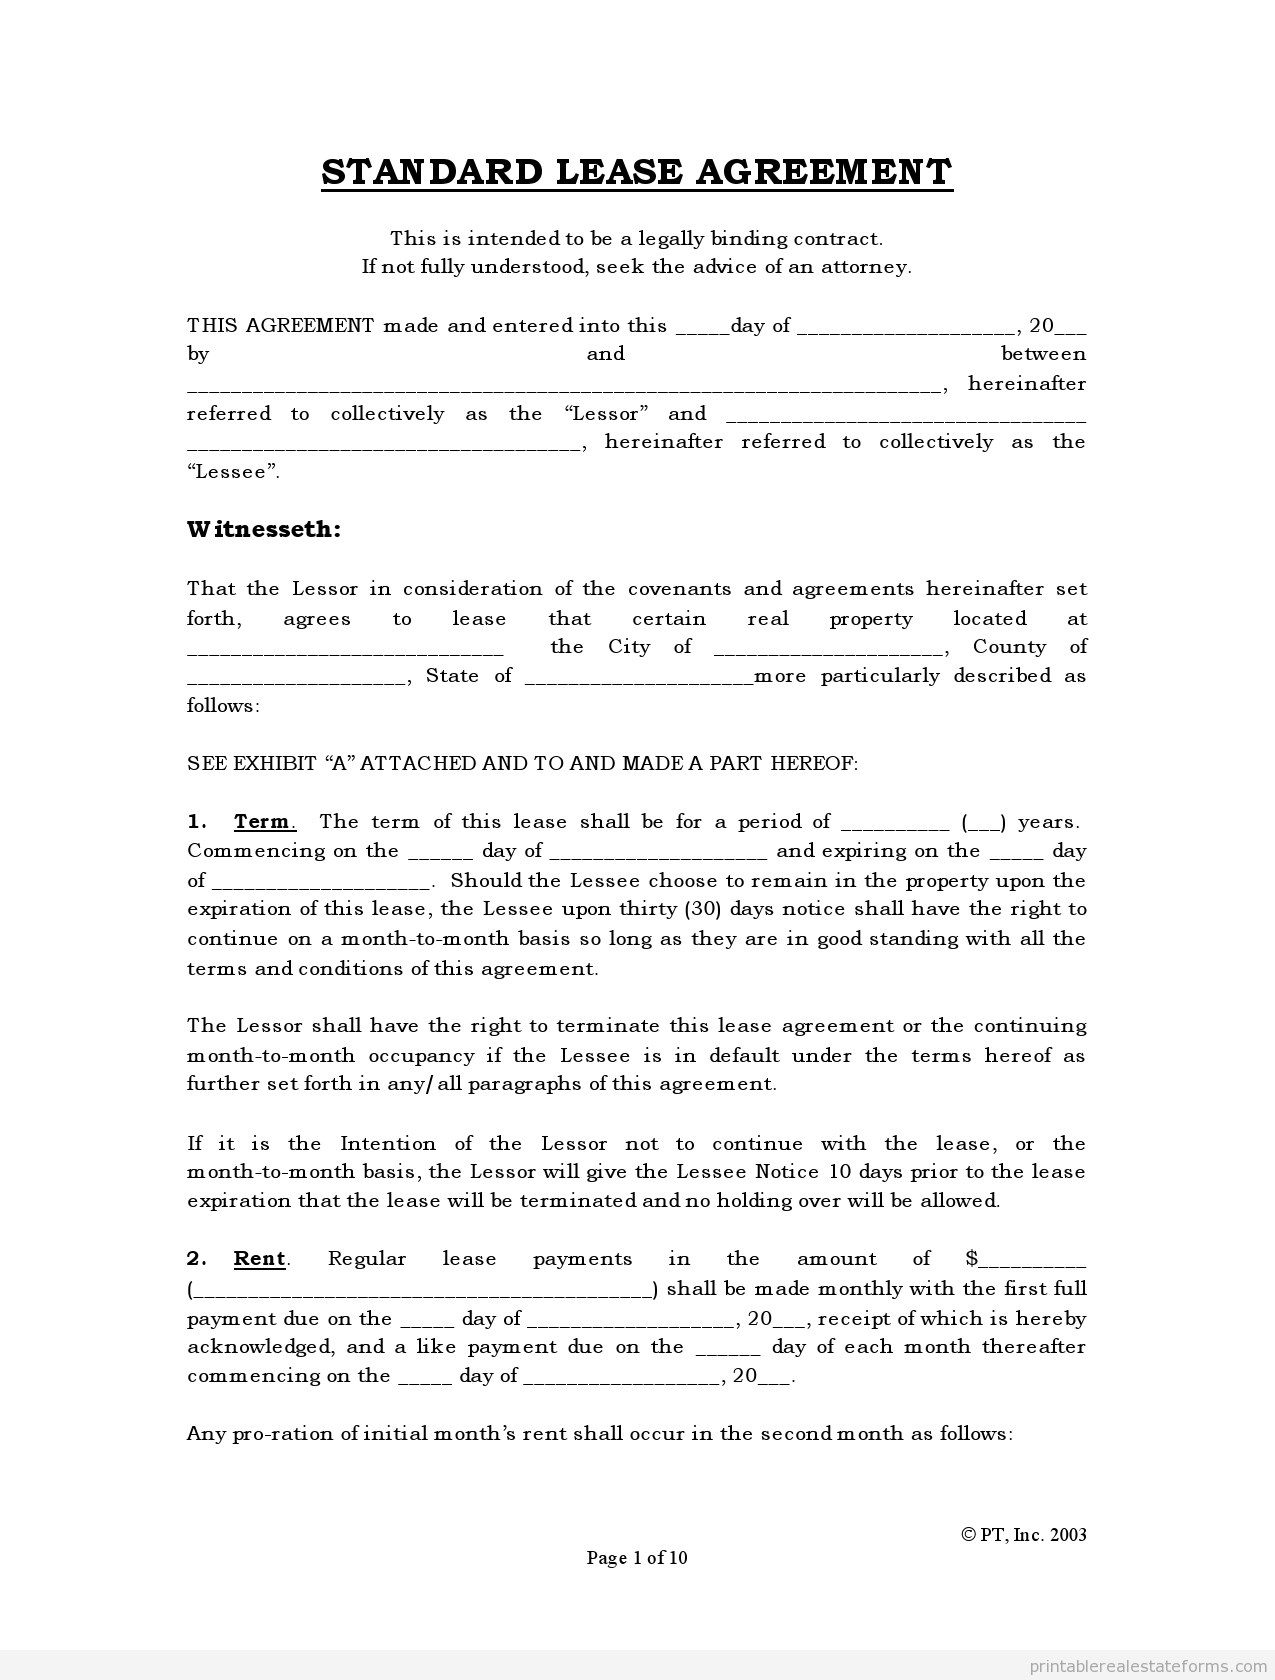 Free Rental Agreements To Print | Free Standard Lease Agreement Form - Free Printable Rental Application